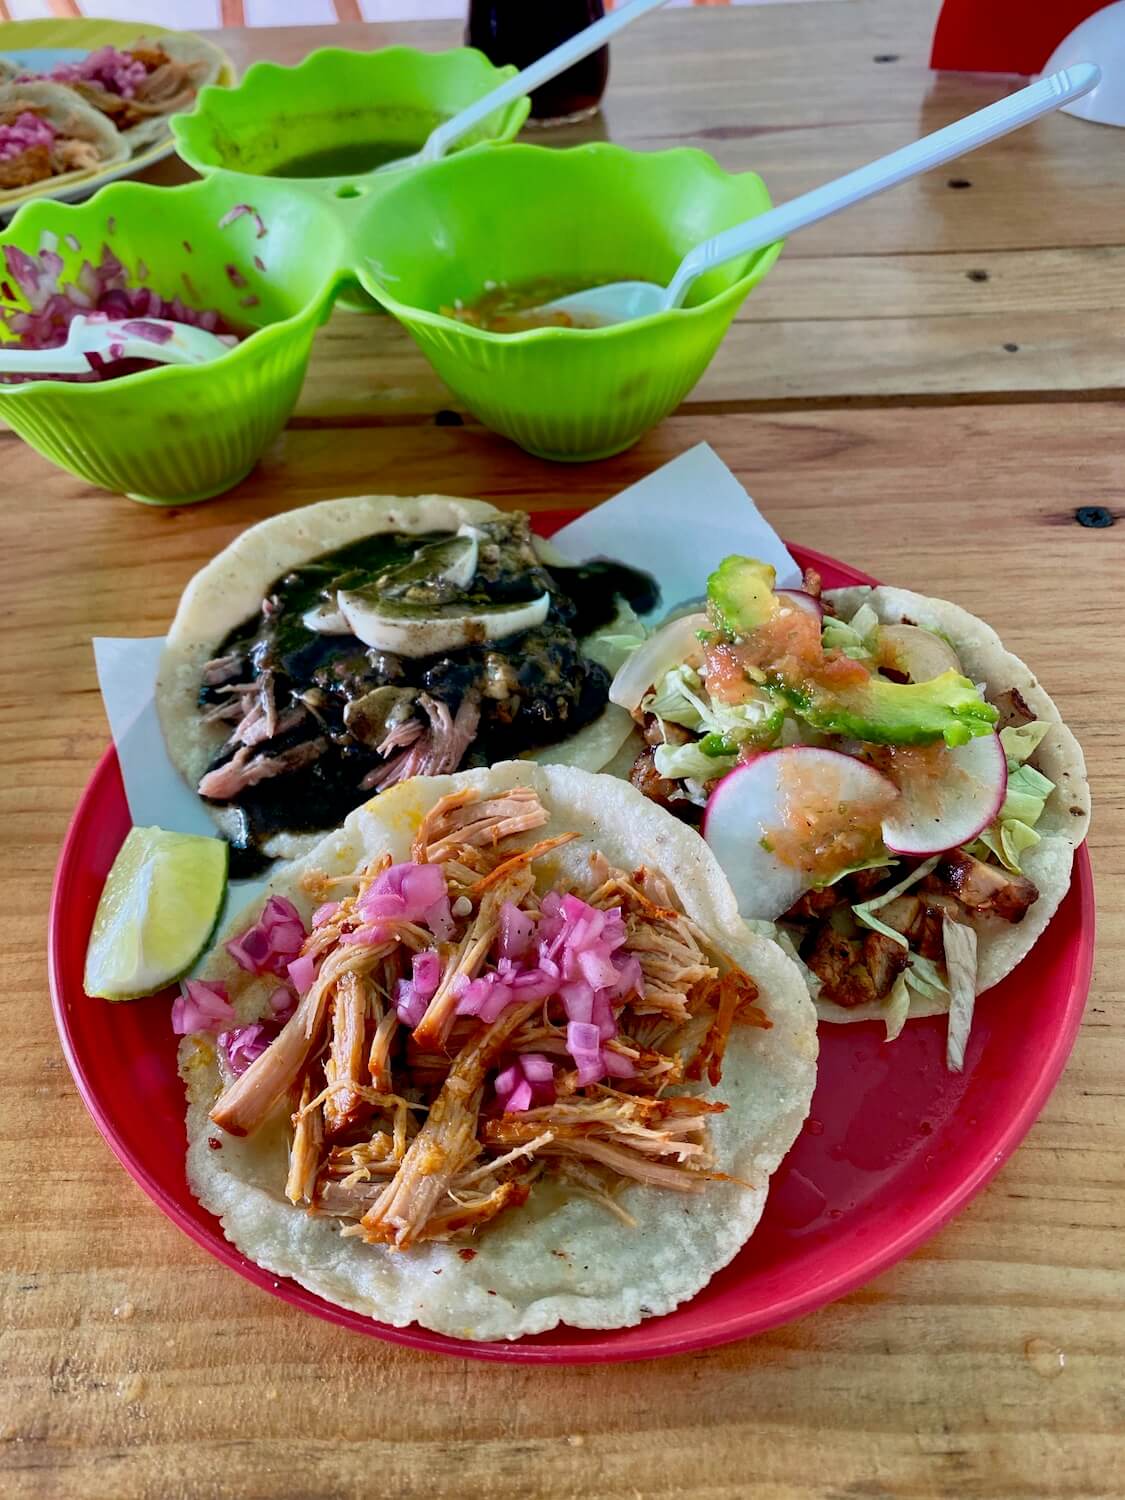 A wood table with a tasty looking plate of Mexican tacos is accompanied with three plastic green bowls with onions, green Salsa and spicy pico de Gallo and white spoons in each bowl.  The tacos are served on a red plastic plate and are three unique varieties.  One taco has pork with a black bean sauce another pork with radishes and avocado and the closest taco to the camera is pulled pork with a sprinkling of red onion on top.  There is a lime wedge as garnish.  